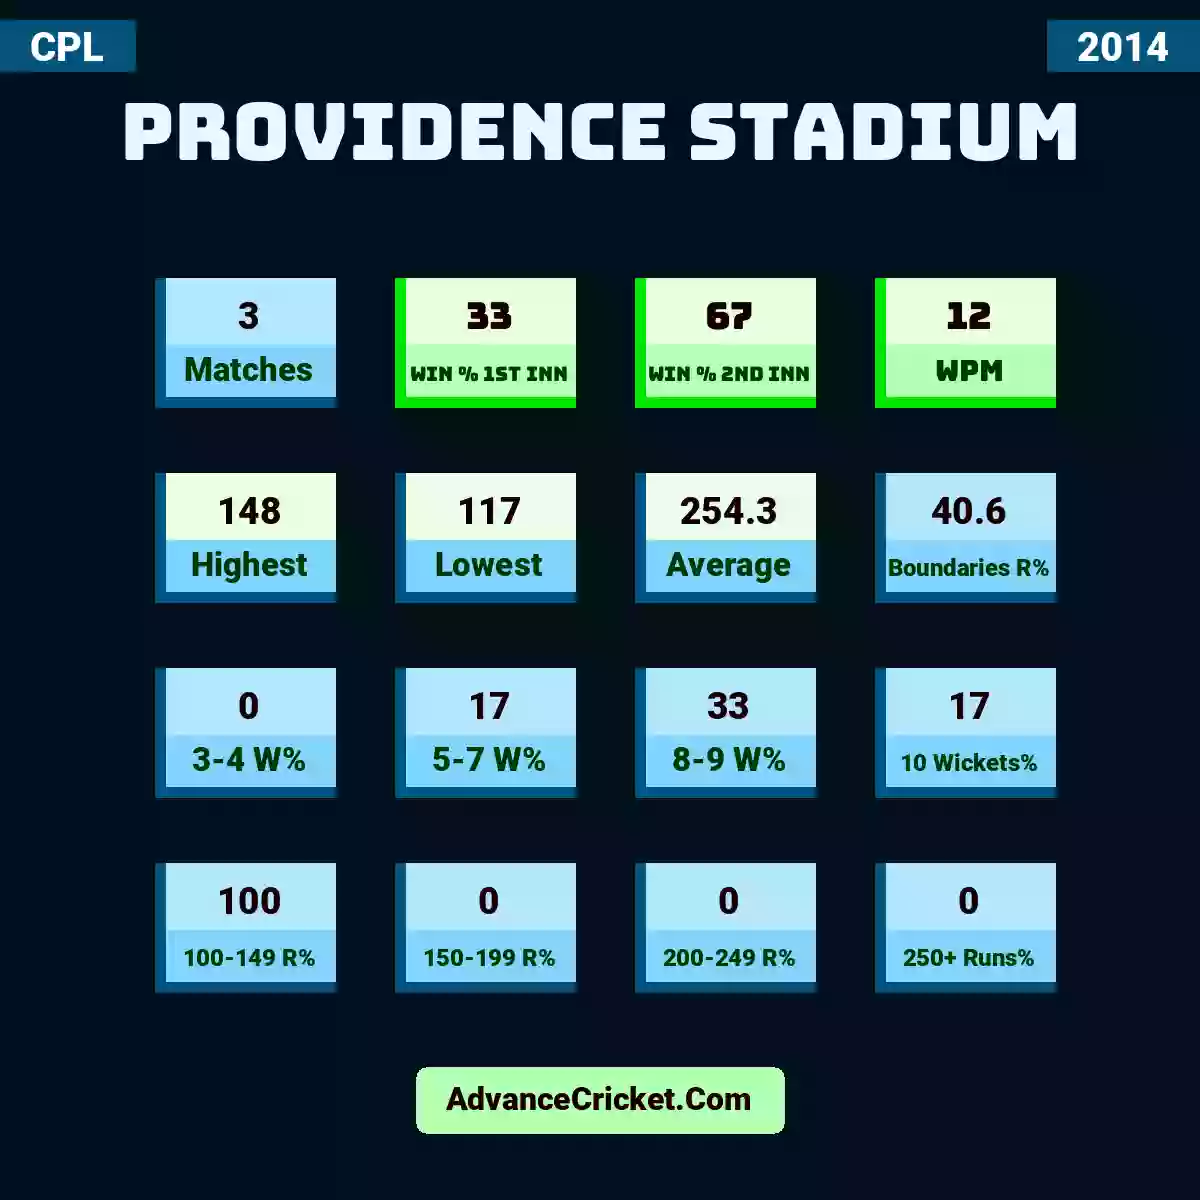 Image showing Providence Stadium with Matches: 3, Win % 1st Inn: 33, Win % 2nd Inn: 67, WPM: 12, Highest: 148, Lowest: 117, Average: 254.3, Boundaries R%: 40.6, 3-4 W%: 0, 5-7 W%: 17, 8-9 W%: 33, 10 Wickets%: 17, 100-149 R%: 100, 150-199 R%: 0, 200-249 R%: 0, 250+ Runs%: 0.